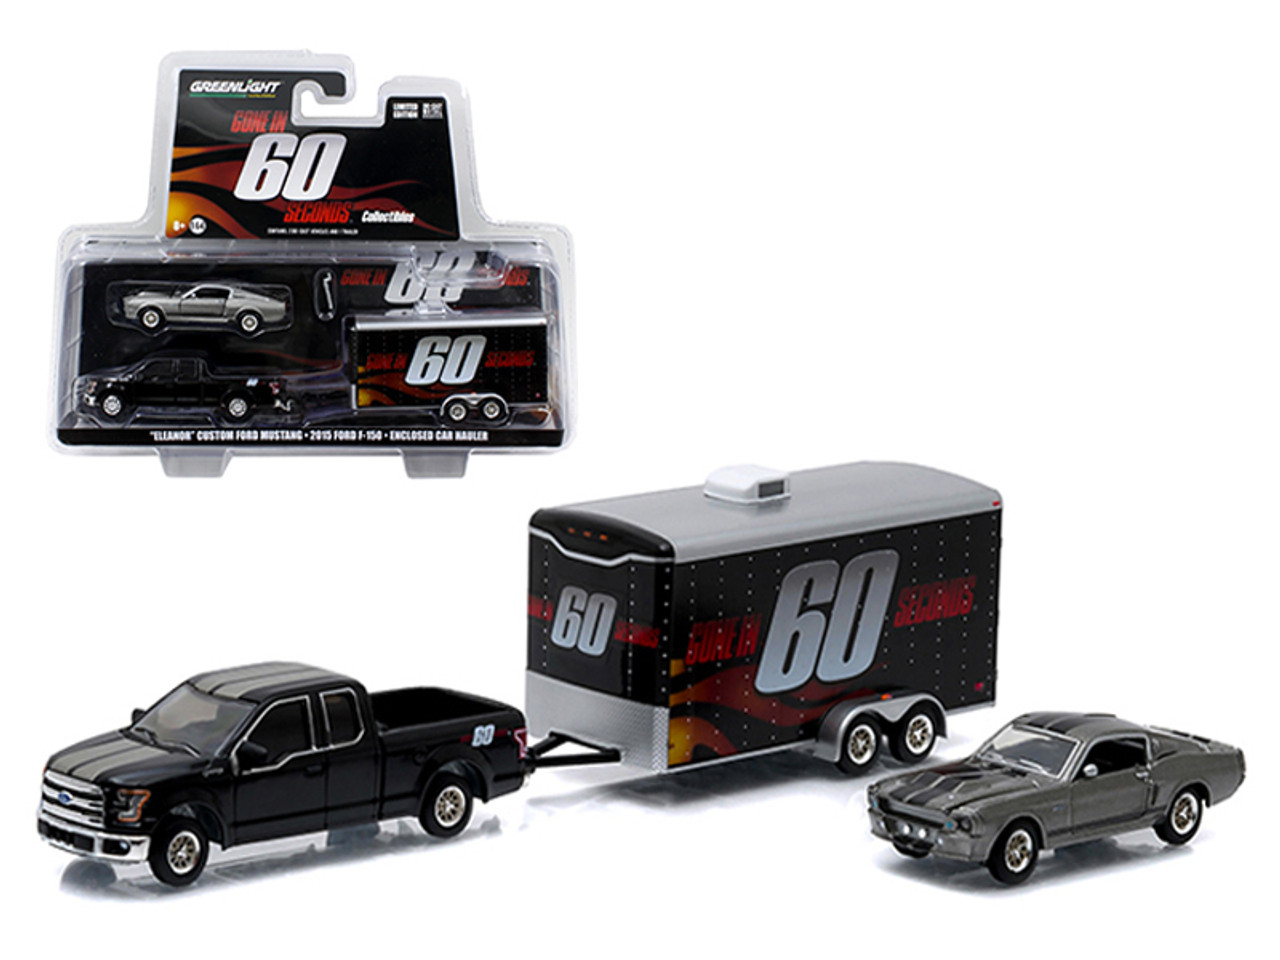 2015 Ford F-150 Pickup Truck and 1967 Custom Ford Mustang "Eleanor" with Enclosed Car Hauler Set "Gone in 60 Seconds" Movie 1/64 Diecast Model Cars by Greenlight